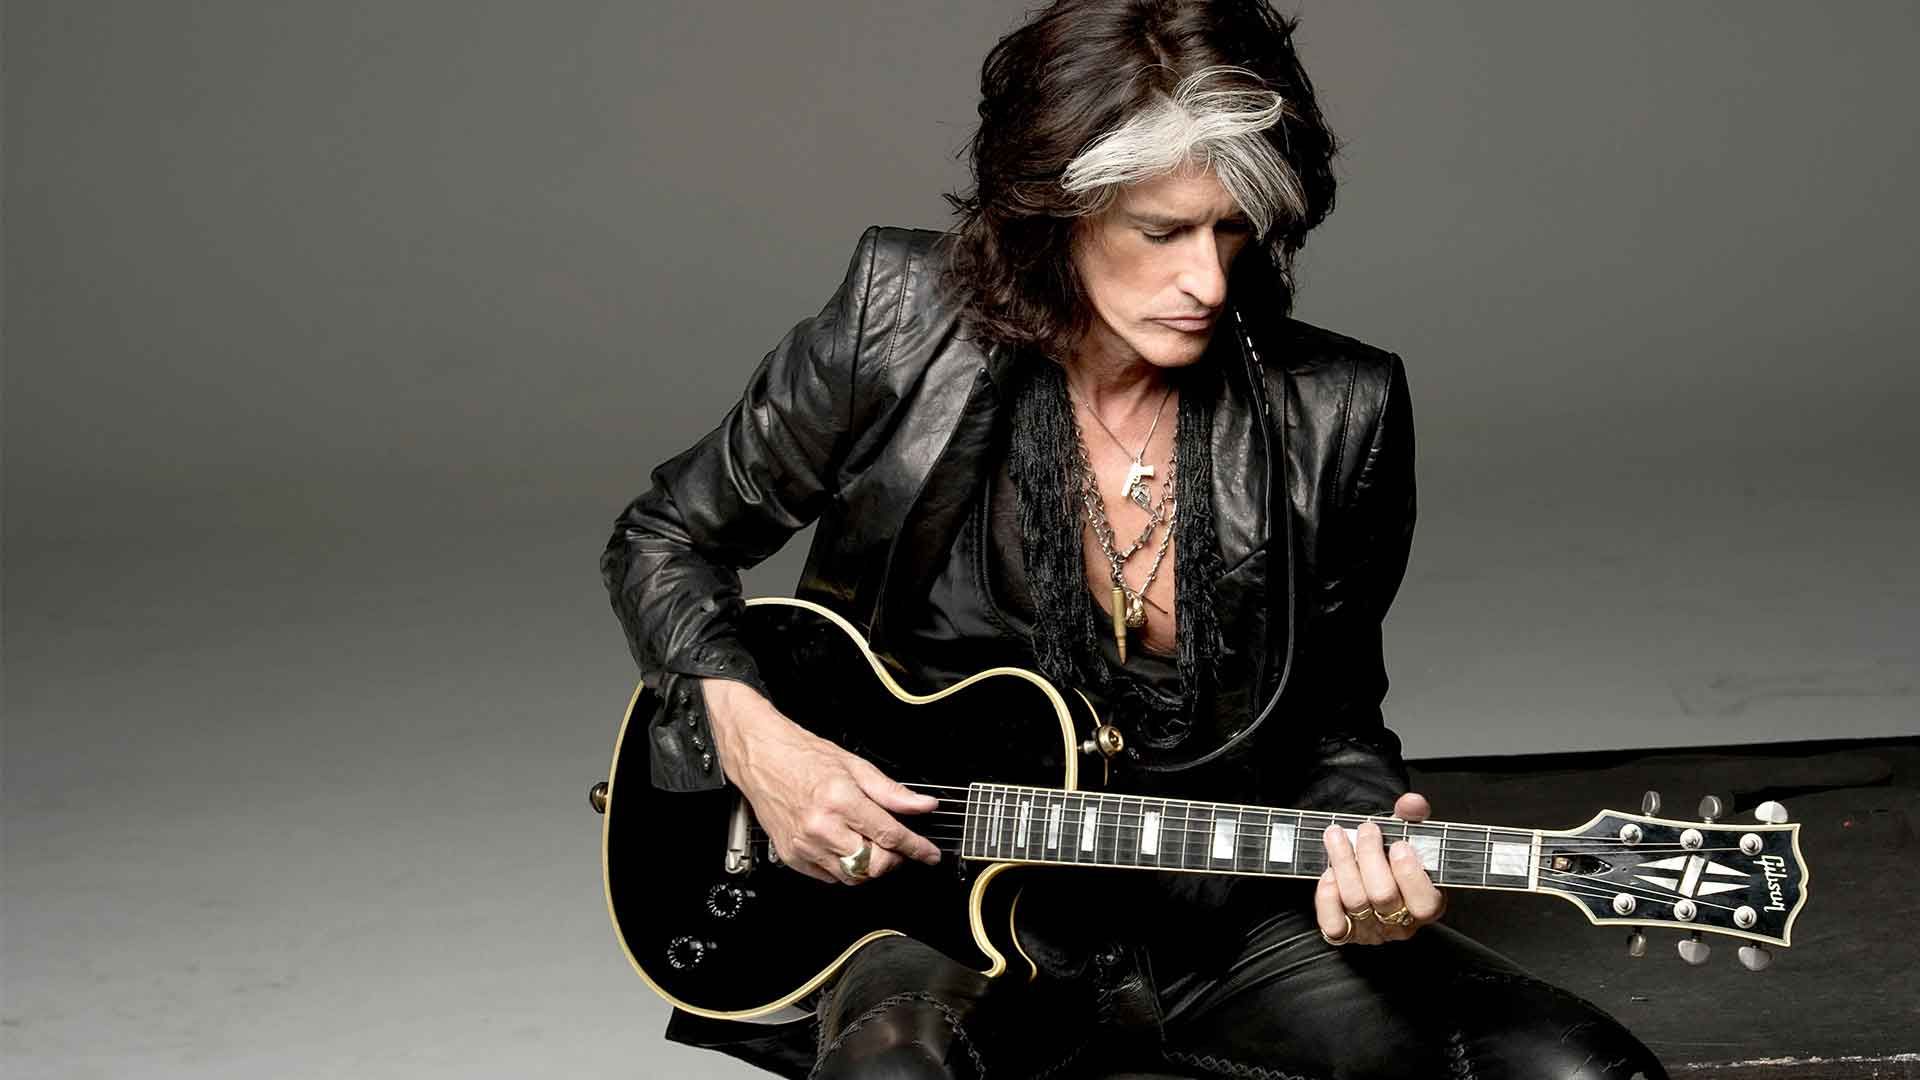 Happy Birthday to Joe Perry! One of the greatest guitarists of all time.  